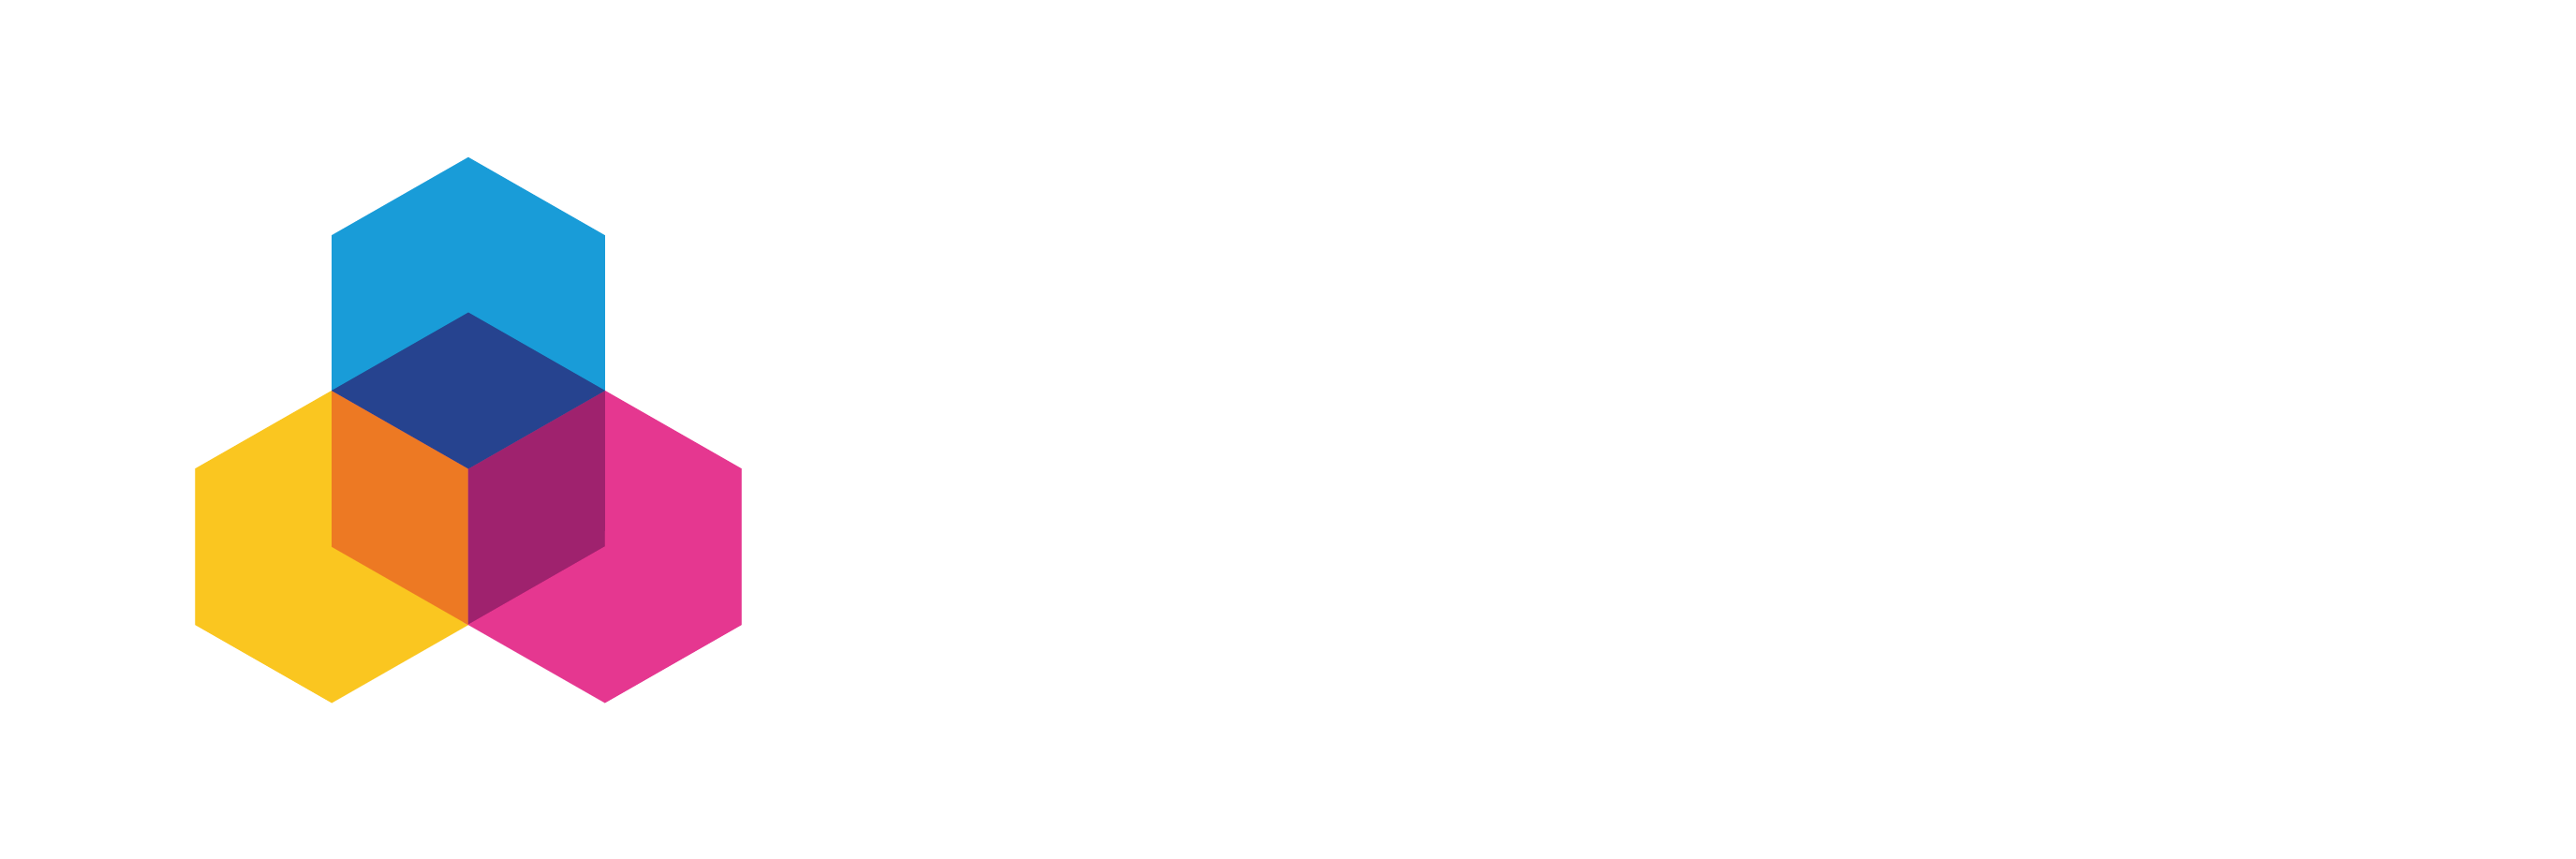 Channable wit logo